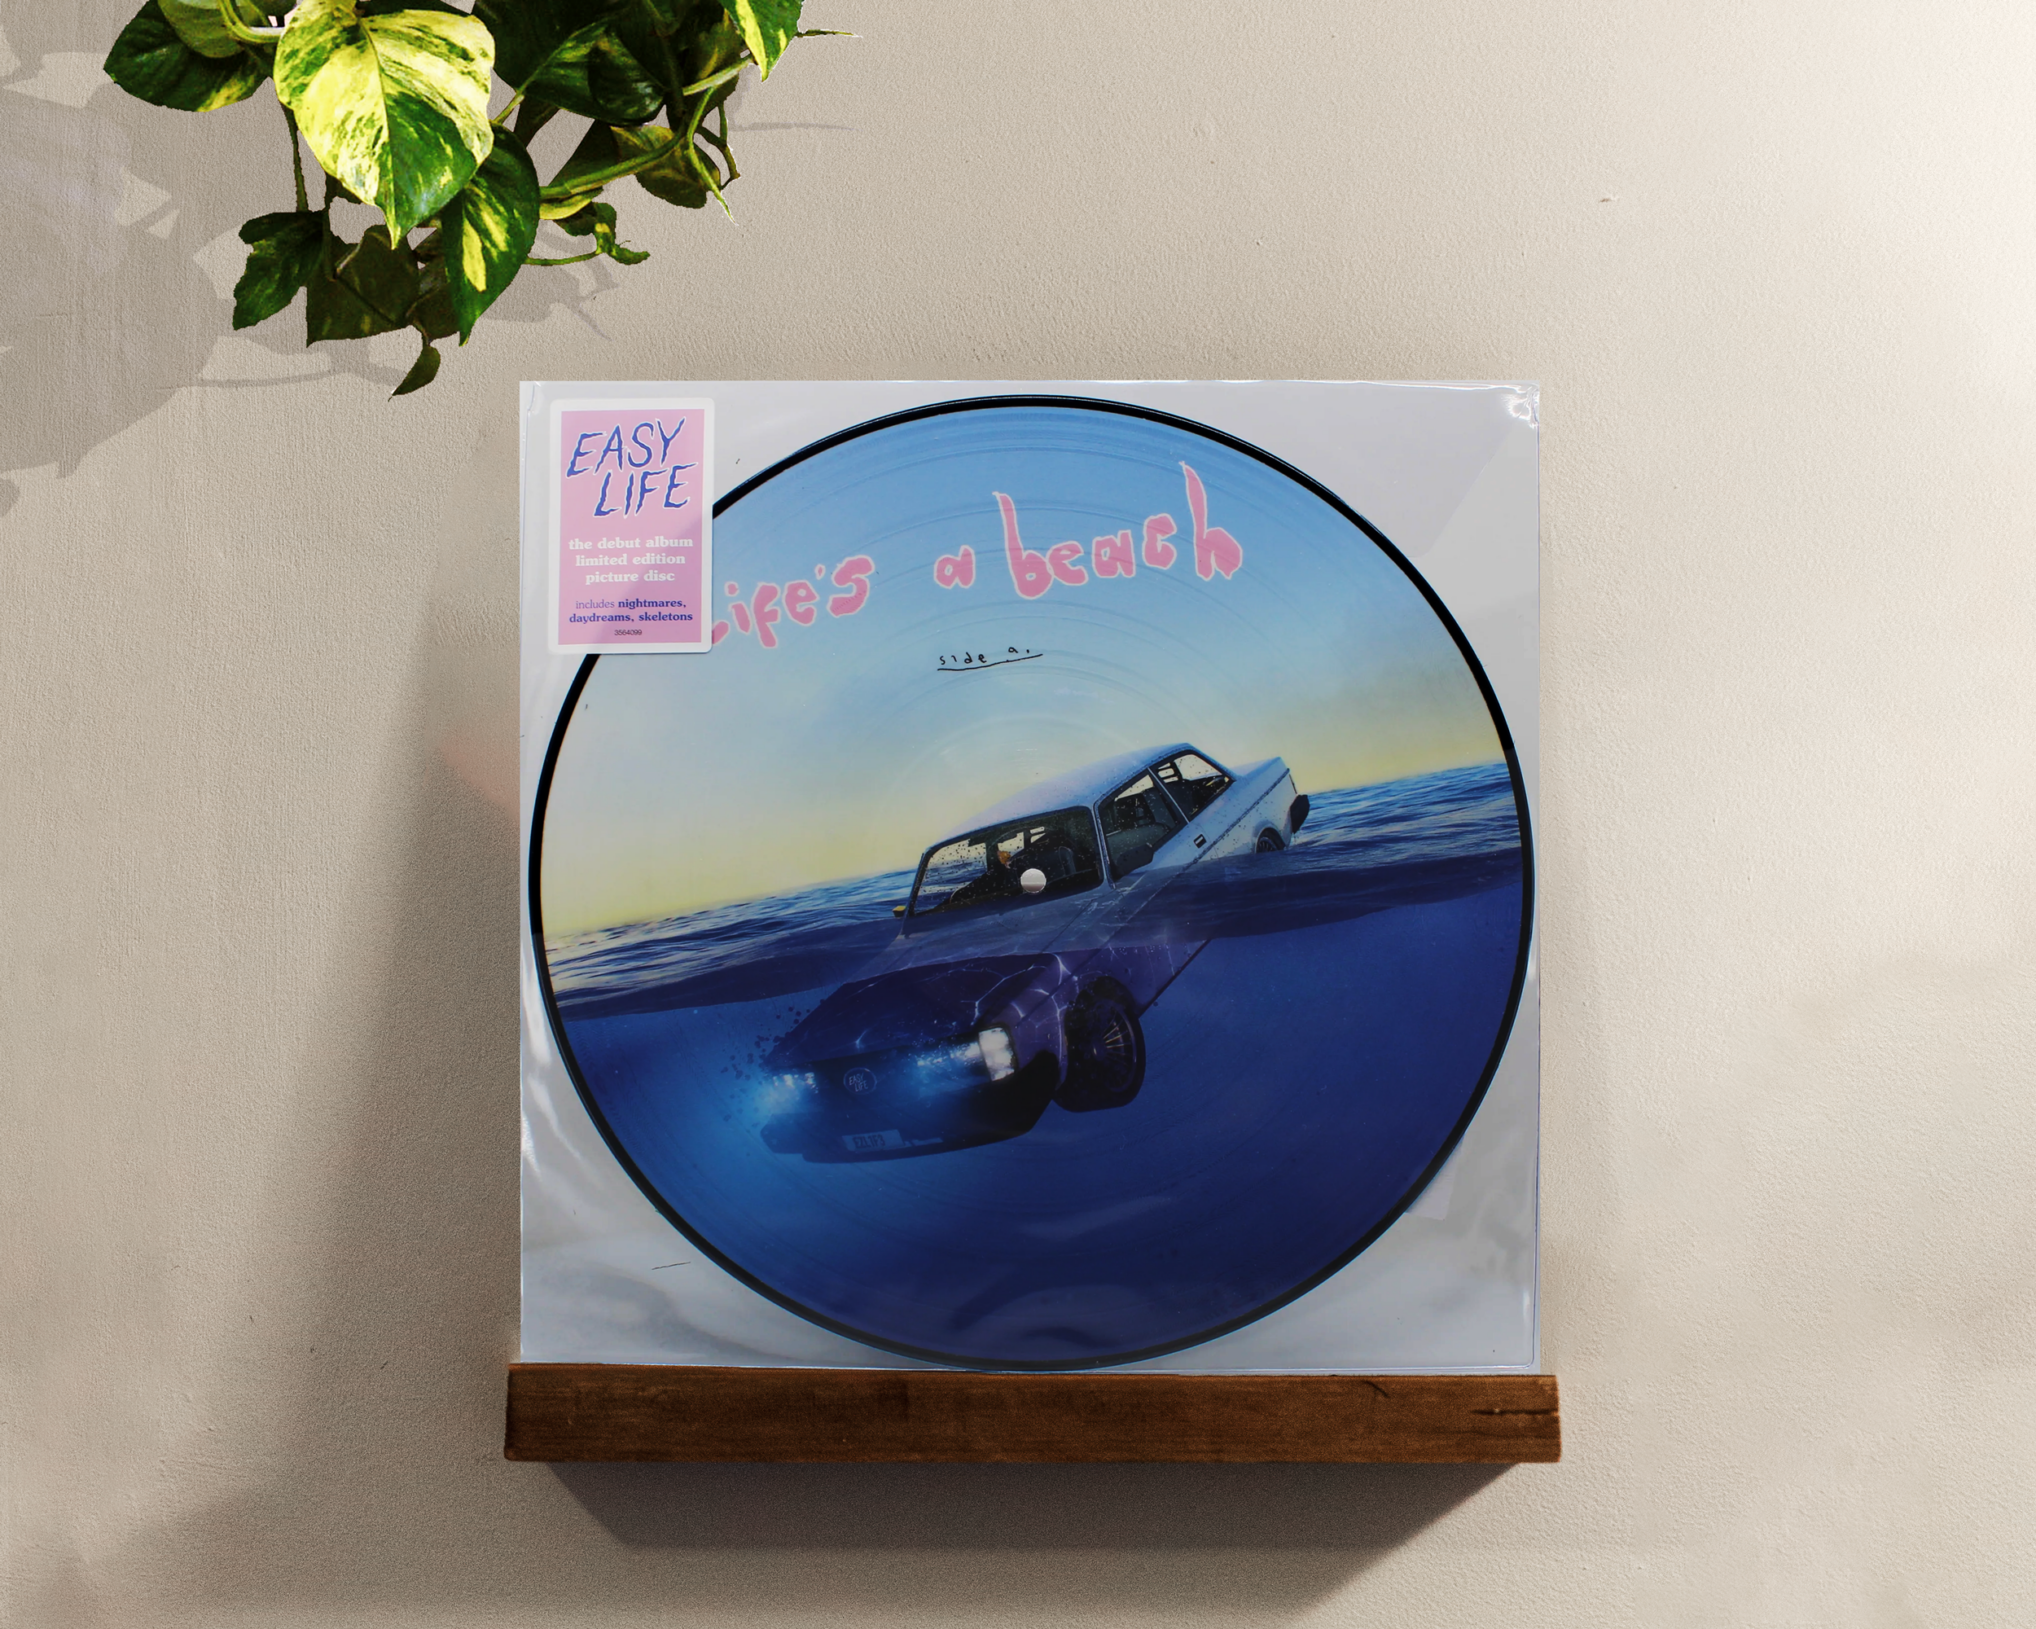 Easy Life - Life's A Beach - My Record Collection - Vinyl